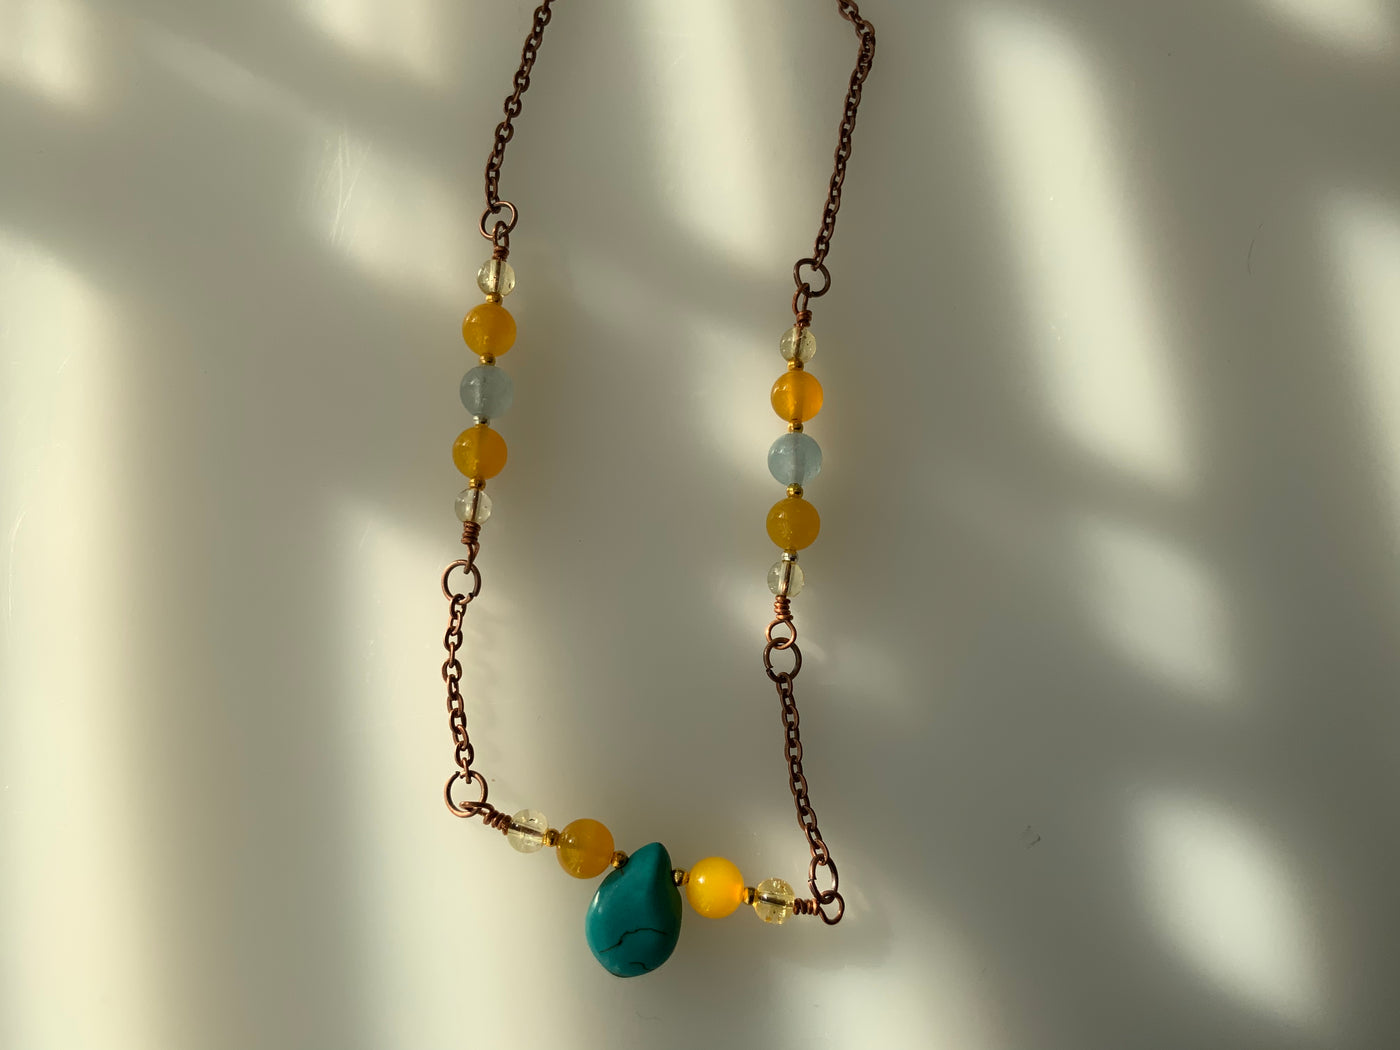 Necklace- Yellow agate, Blue howlite briolette, and quartz wire and chain